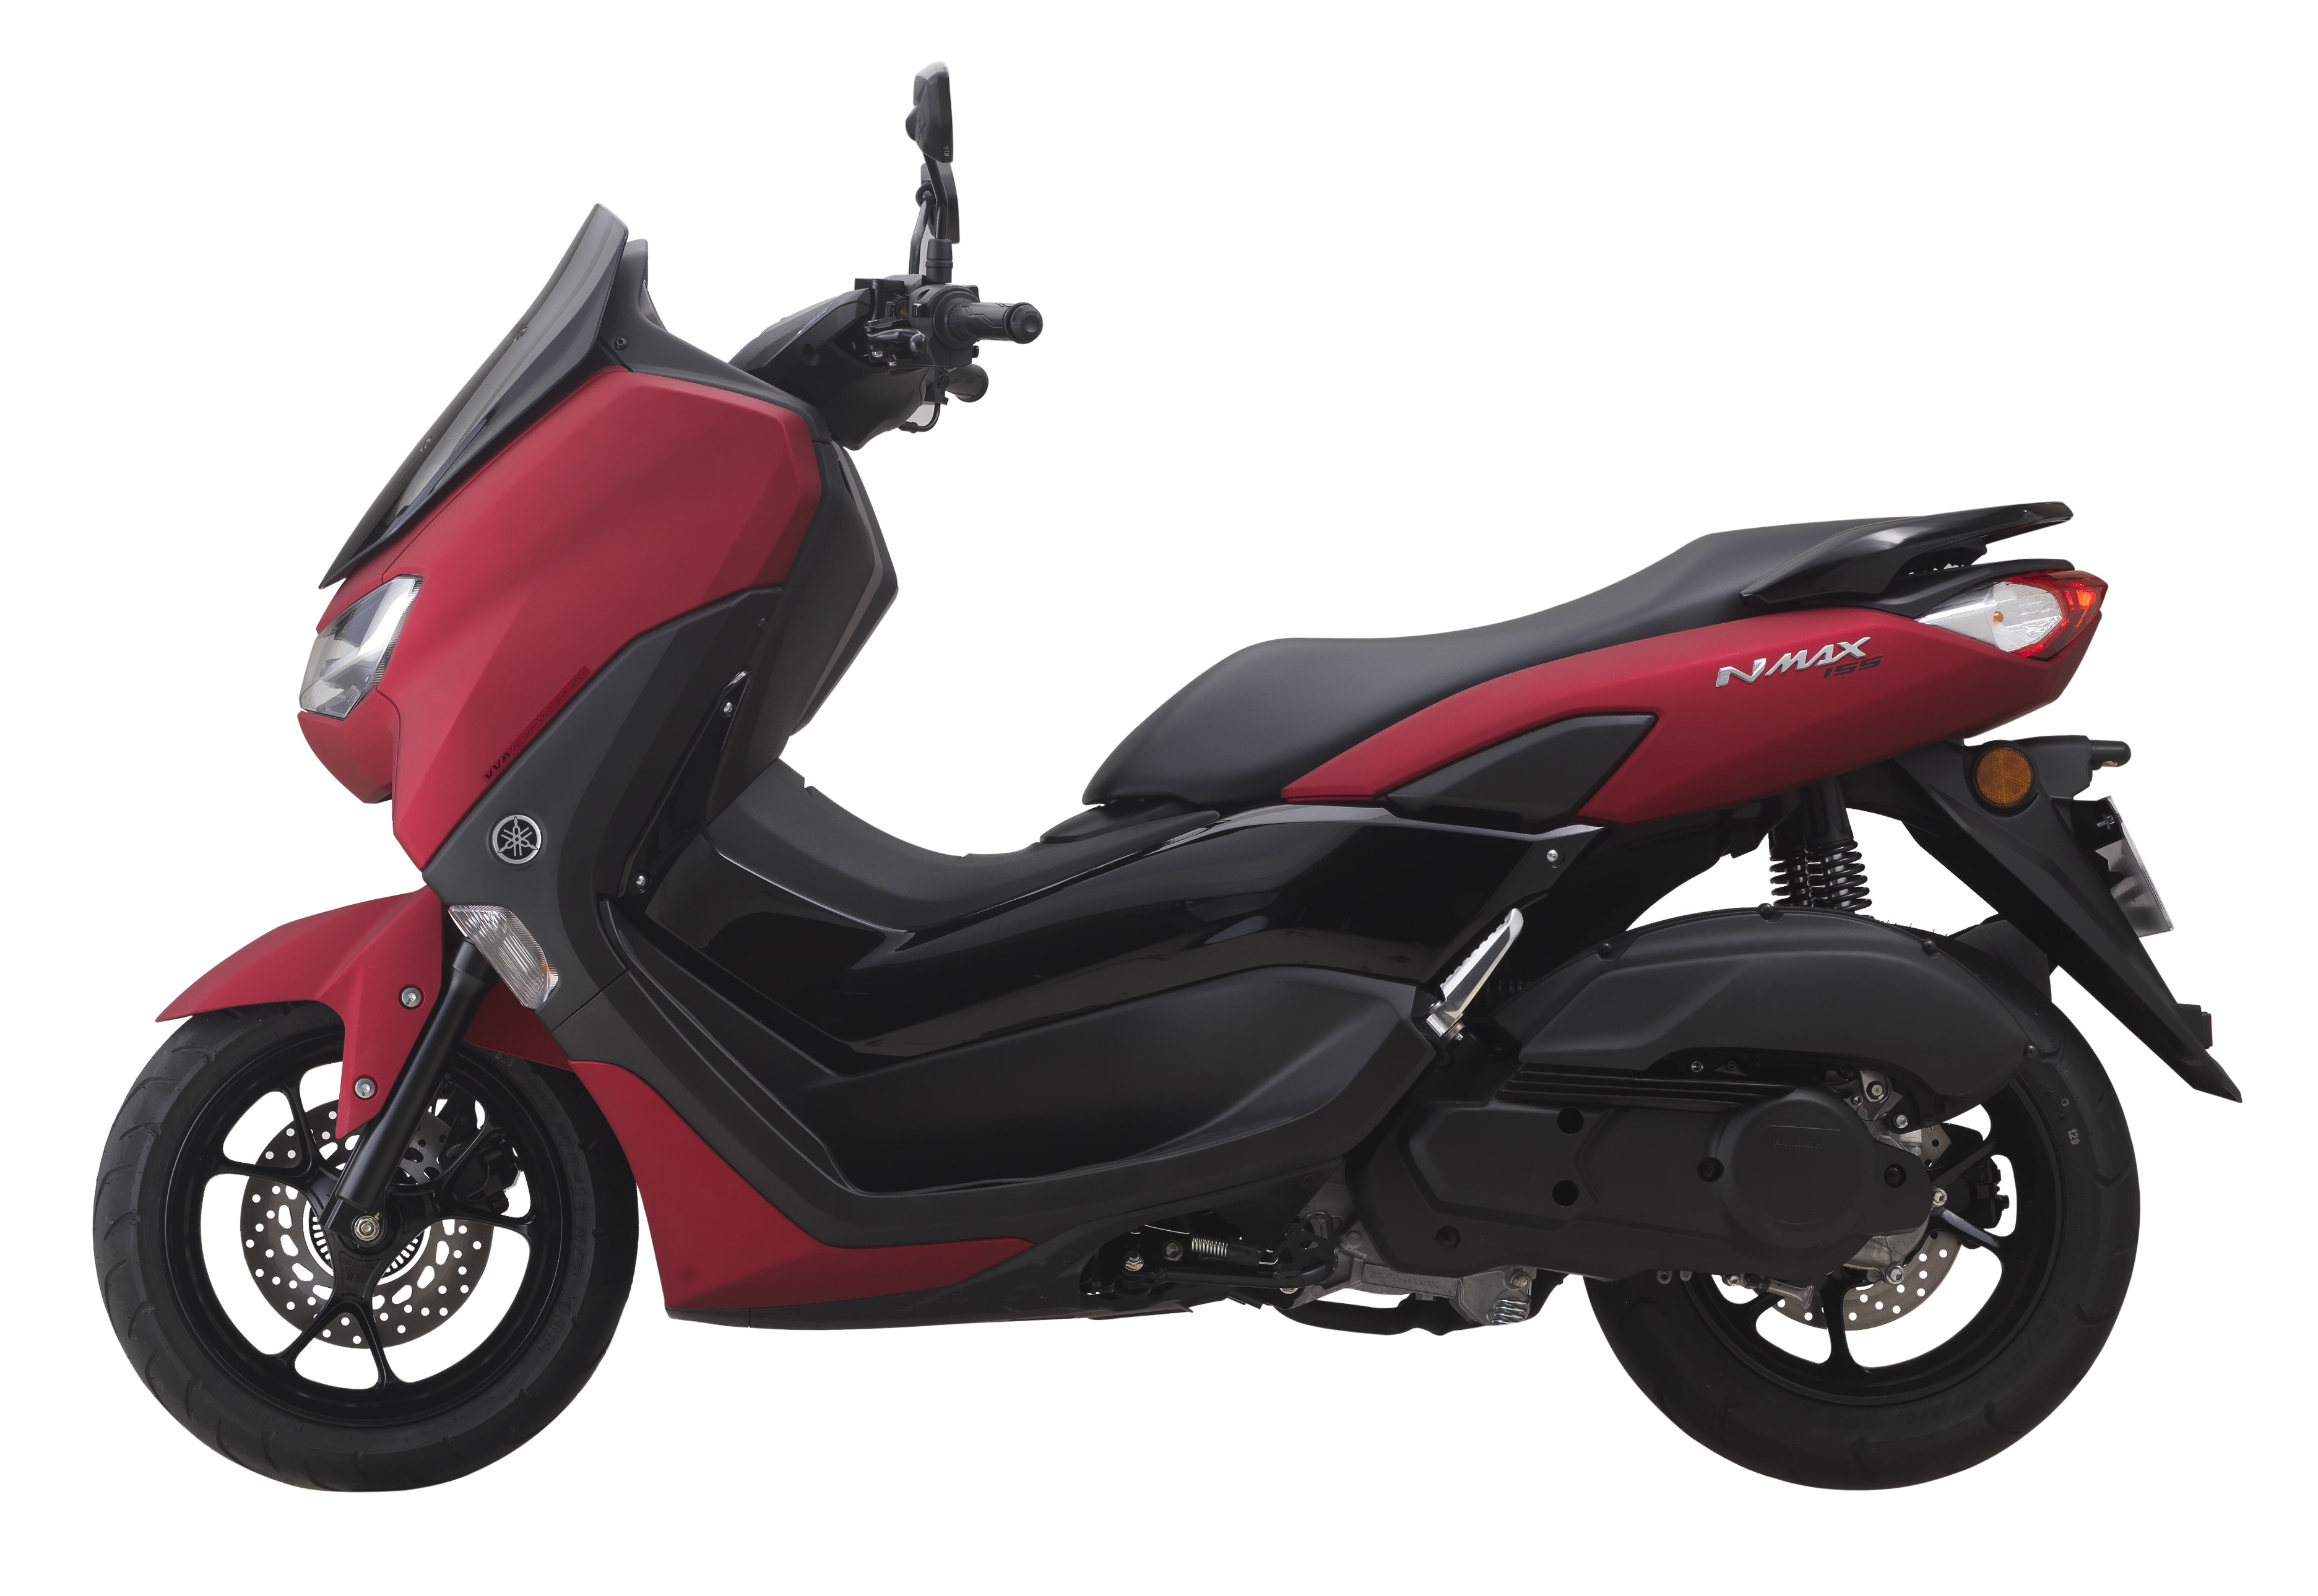 2021 Yamaha NMax 155 scooter in Malaysia, RM8,998 2021 ...